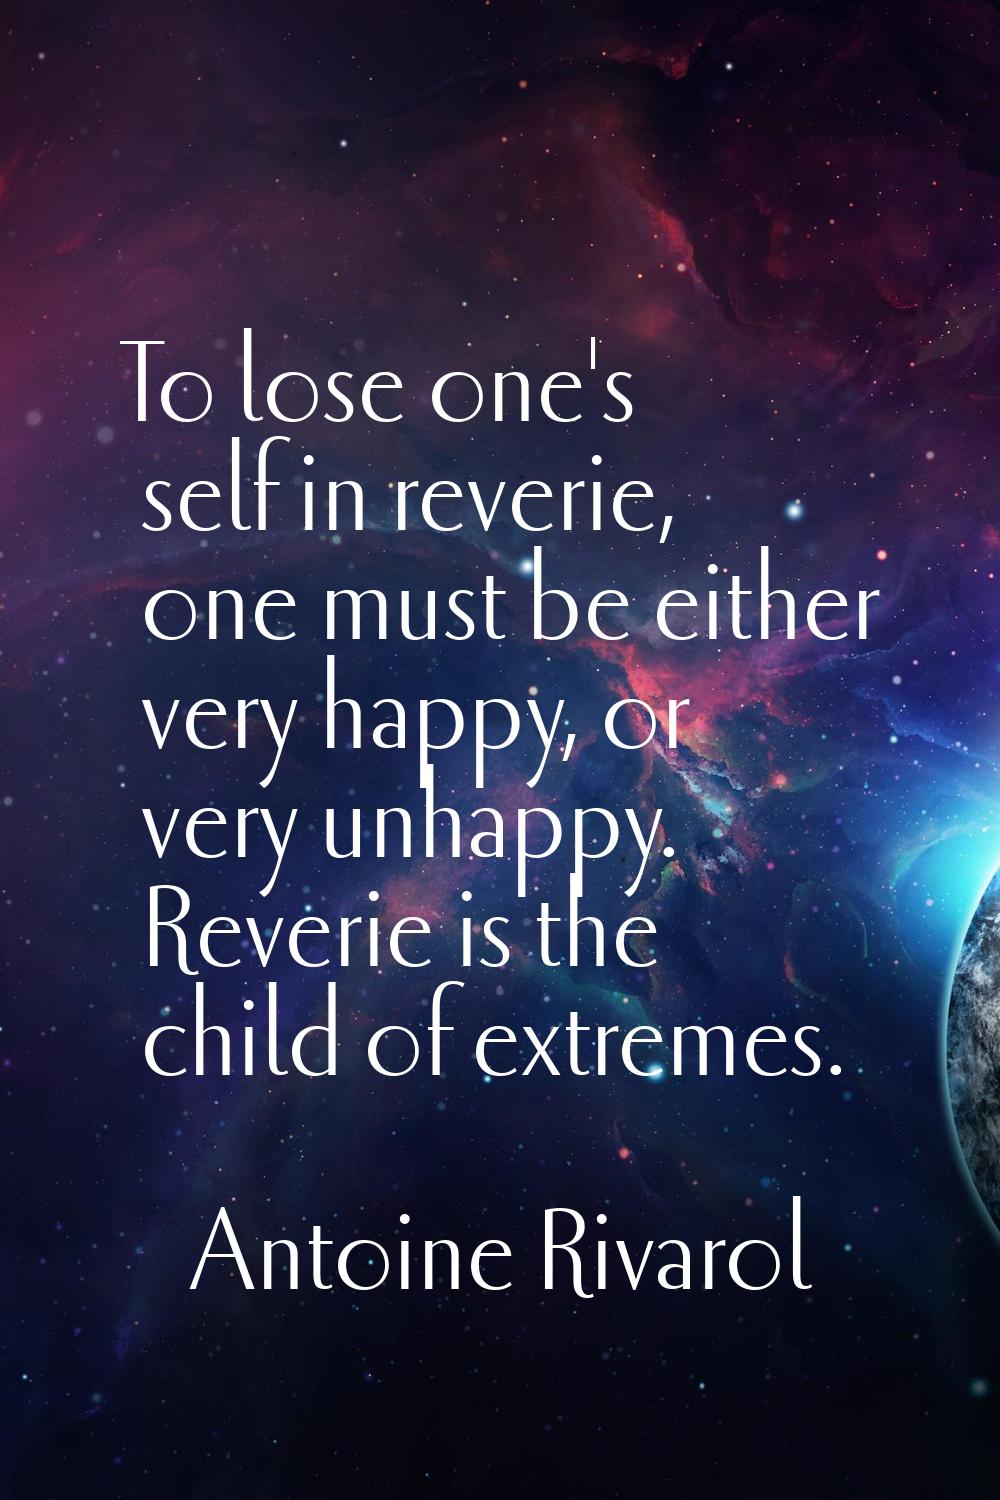 To lose one's self in reverie, one must be either very happy, or very unhappy. Reverie is the child